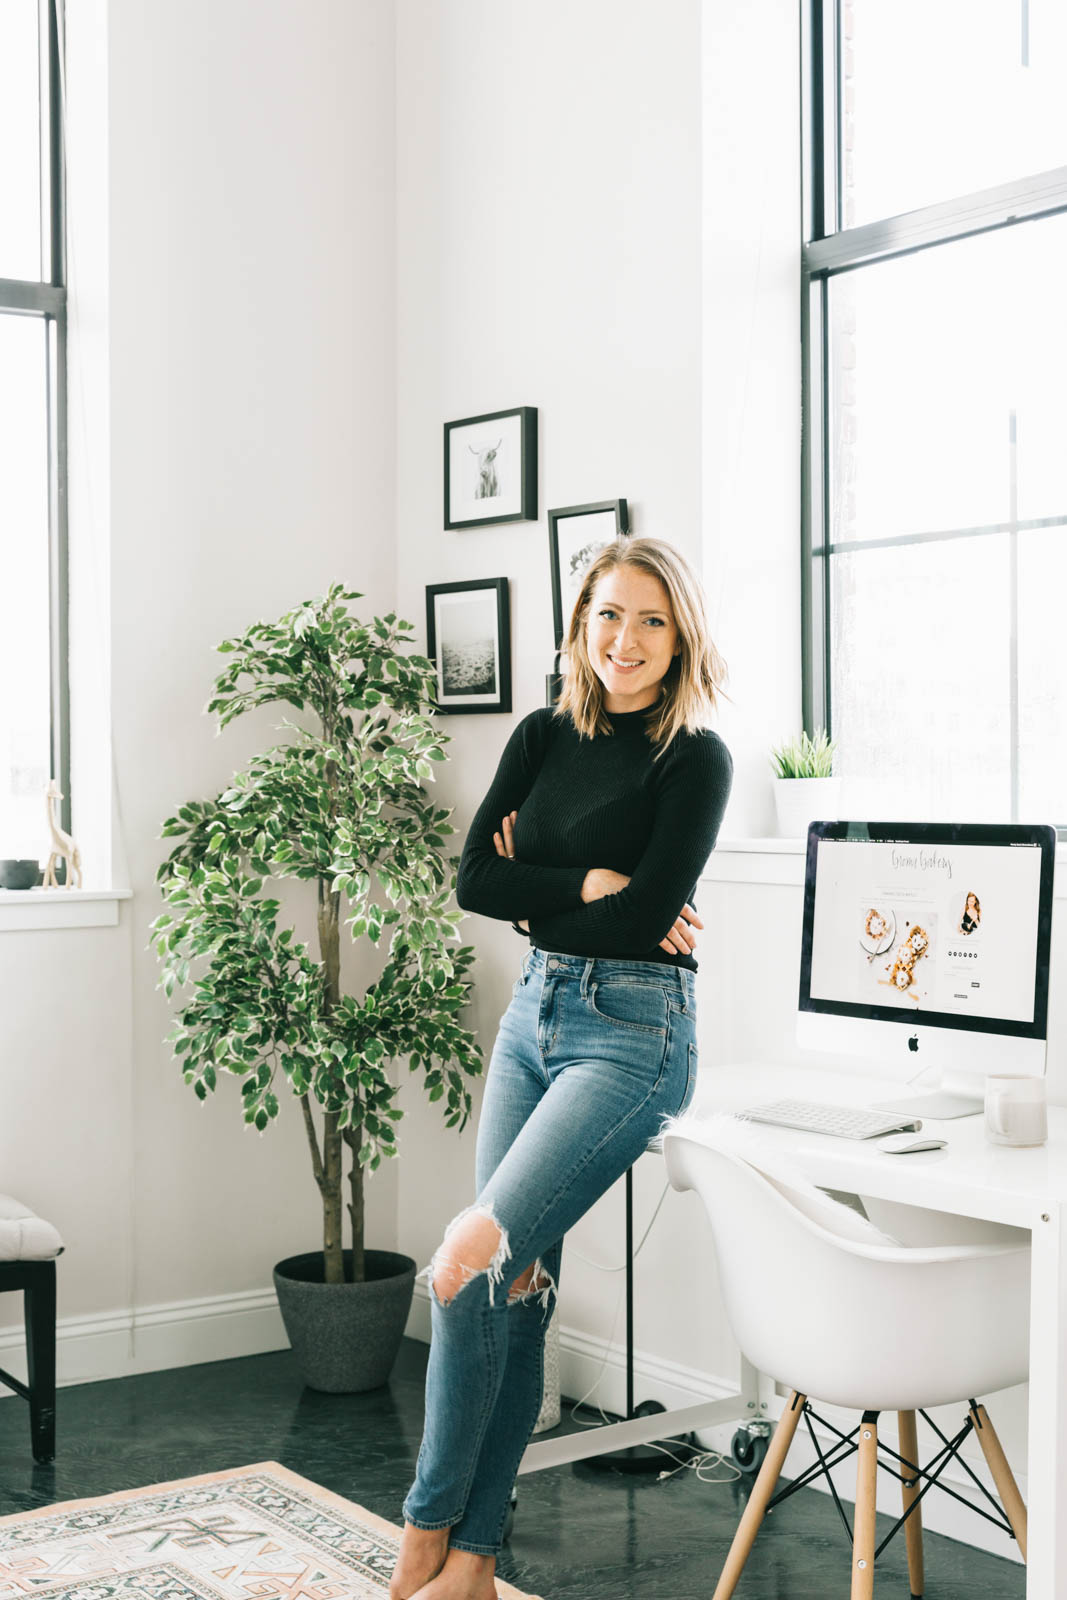 How I Hired An Interior Designer At Age 25